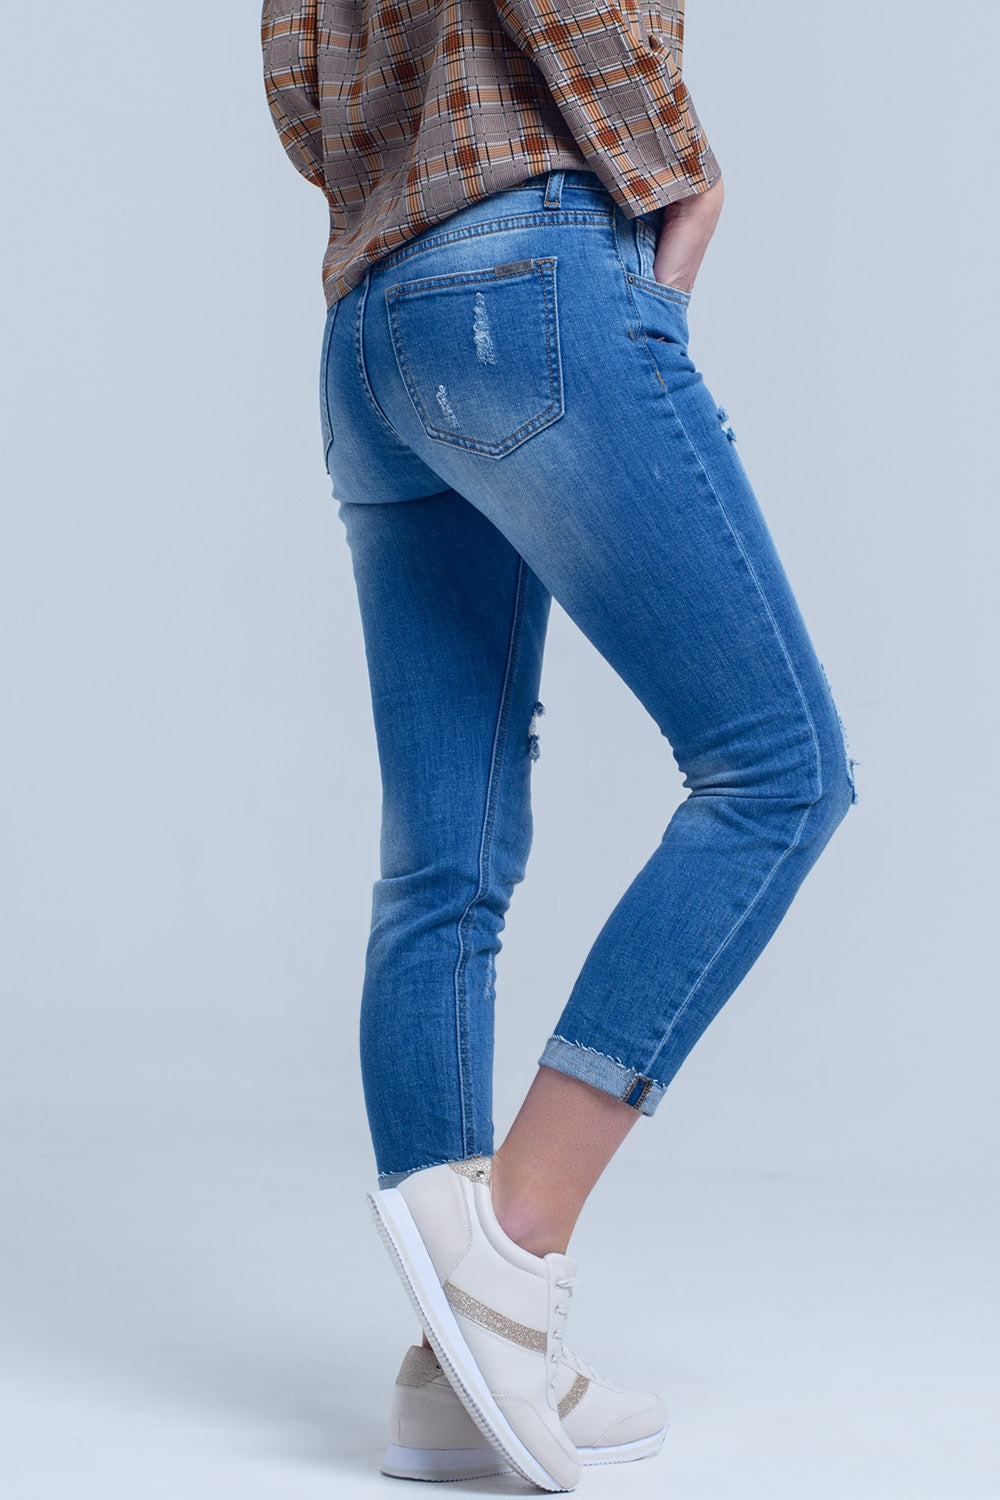 Jean skinny with rips on the legs Szua Store